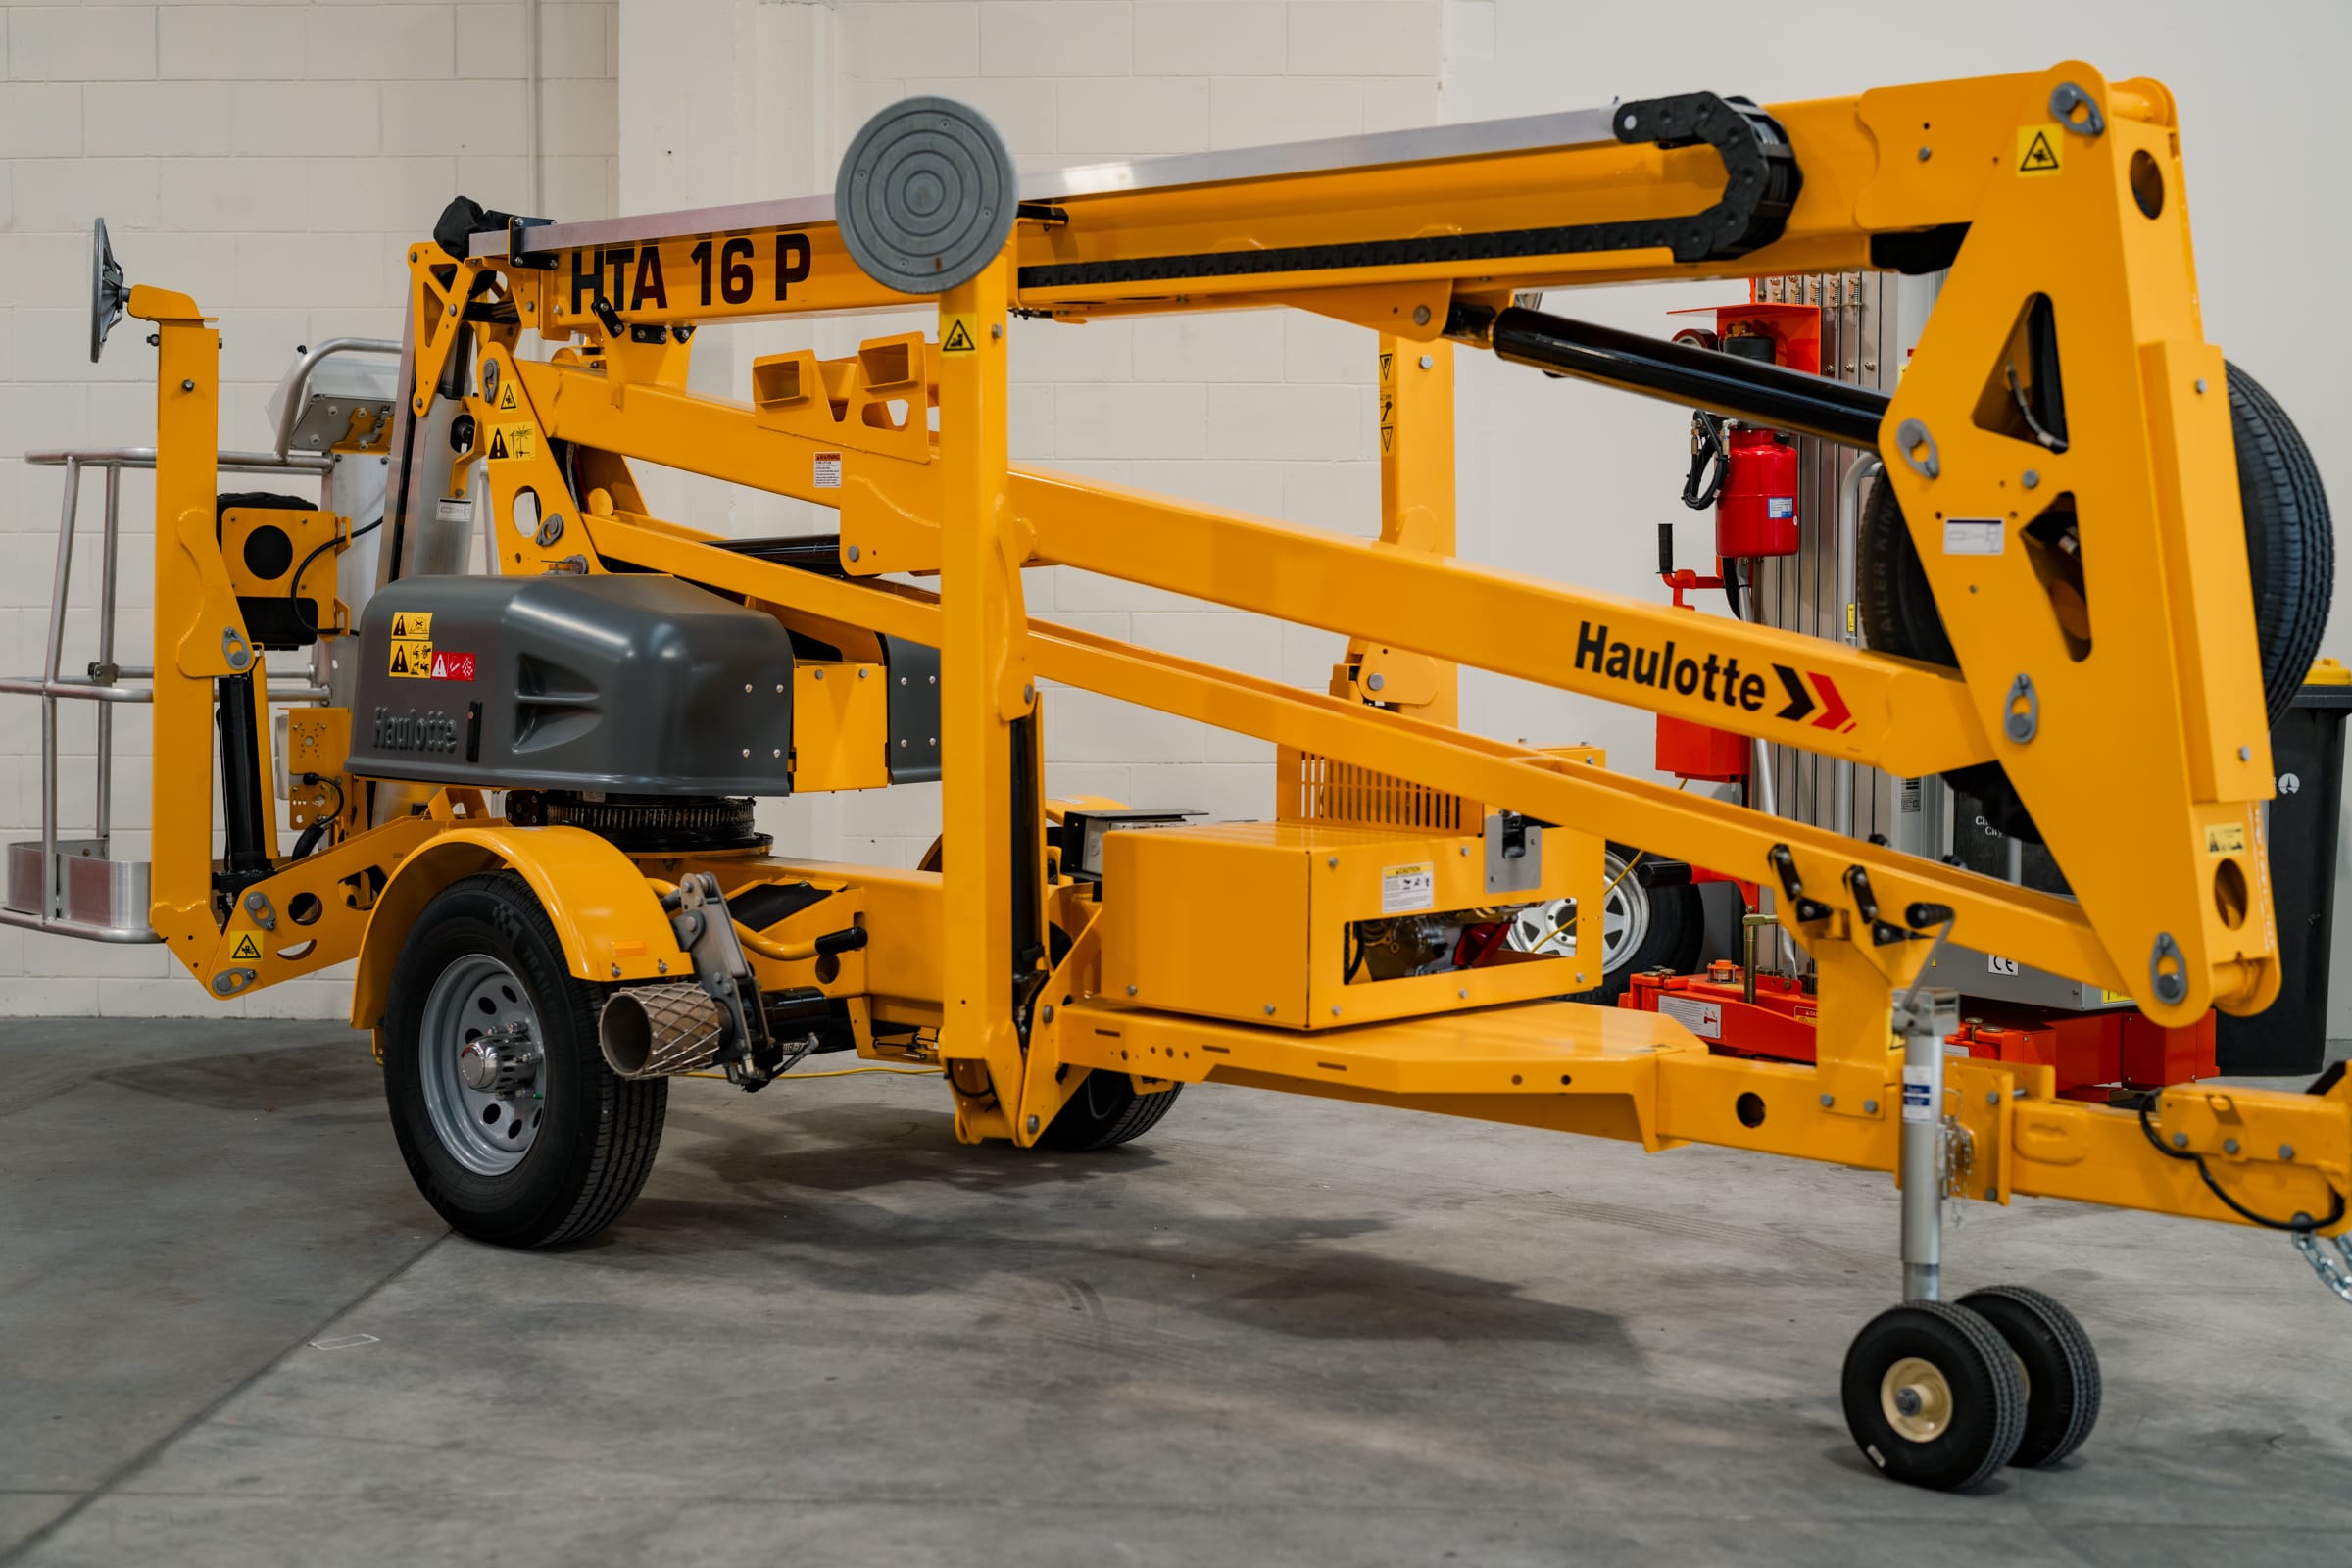 LiftX EWP Christchurch showroom for sales of Haulotte elevated work platforms